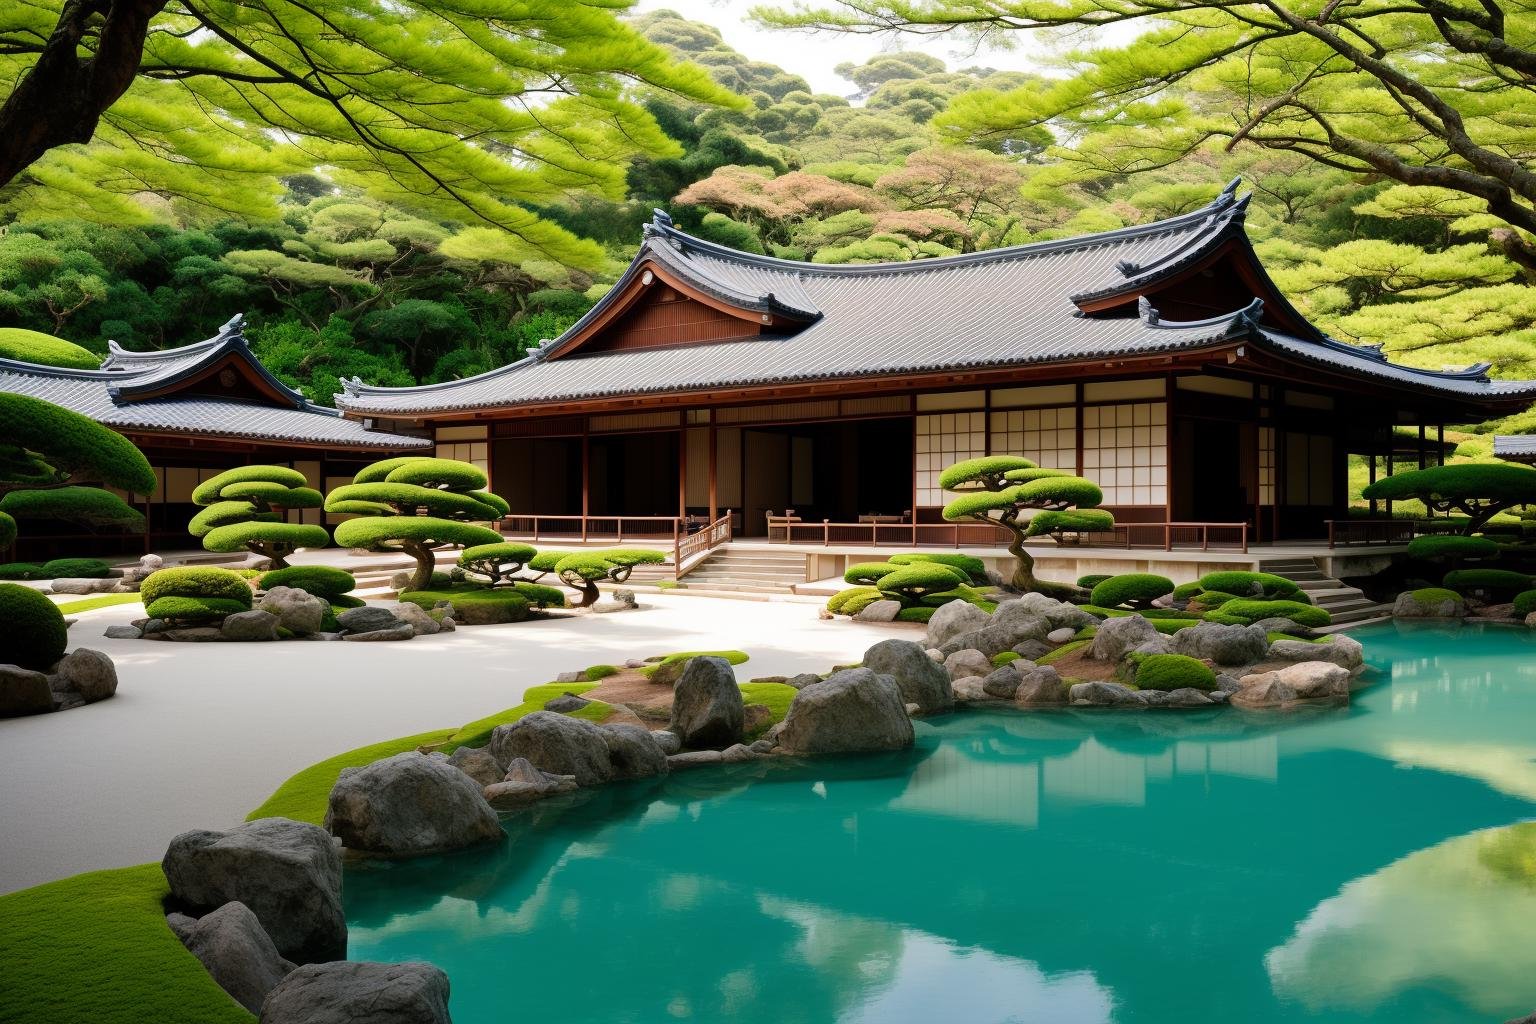 A breathtaking view of the renowned Japanese villa's exterior surrounded by tranquil waters, reflecting its elegance and grandeur. The illustrious villa stands amidst lush greenery, reminiscent of traditional Japanese gardens. The art form chosen for this depiction is photography, captured with a 35mm lens, bringing the exquisite details to life. The color temperature is cool, enhancing the serene ambiance. A subtle smile graces the face of a person standing by, admiring the view. Soft, natural lighting gently illuminates the scene, creating an atmosphere of tranquility and nostalgia